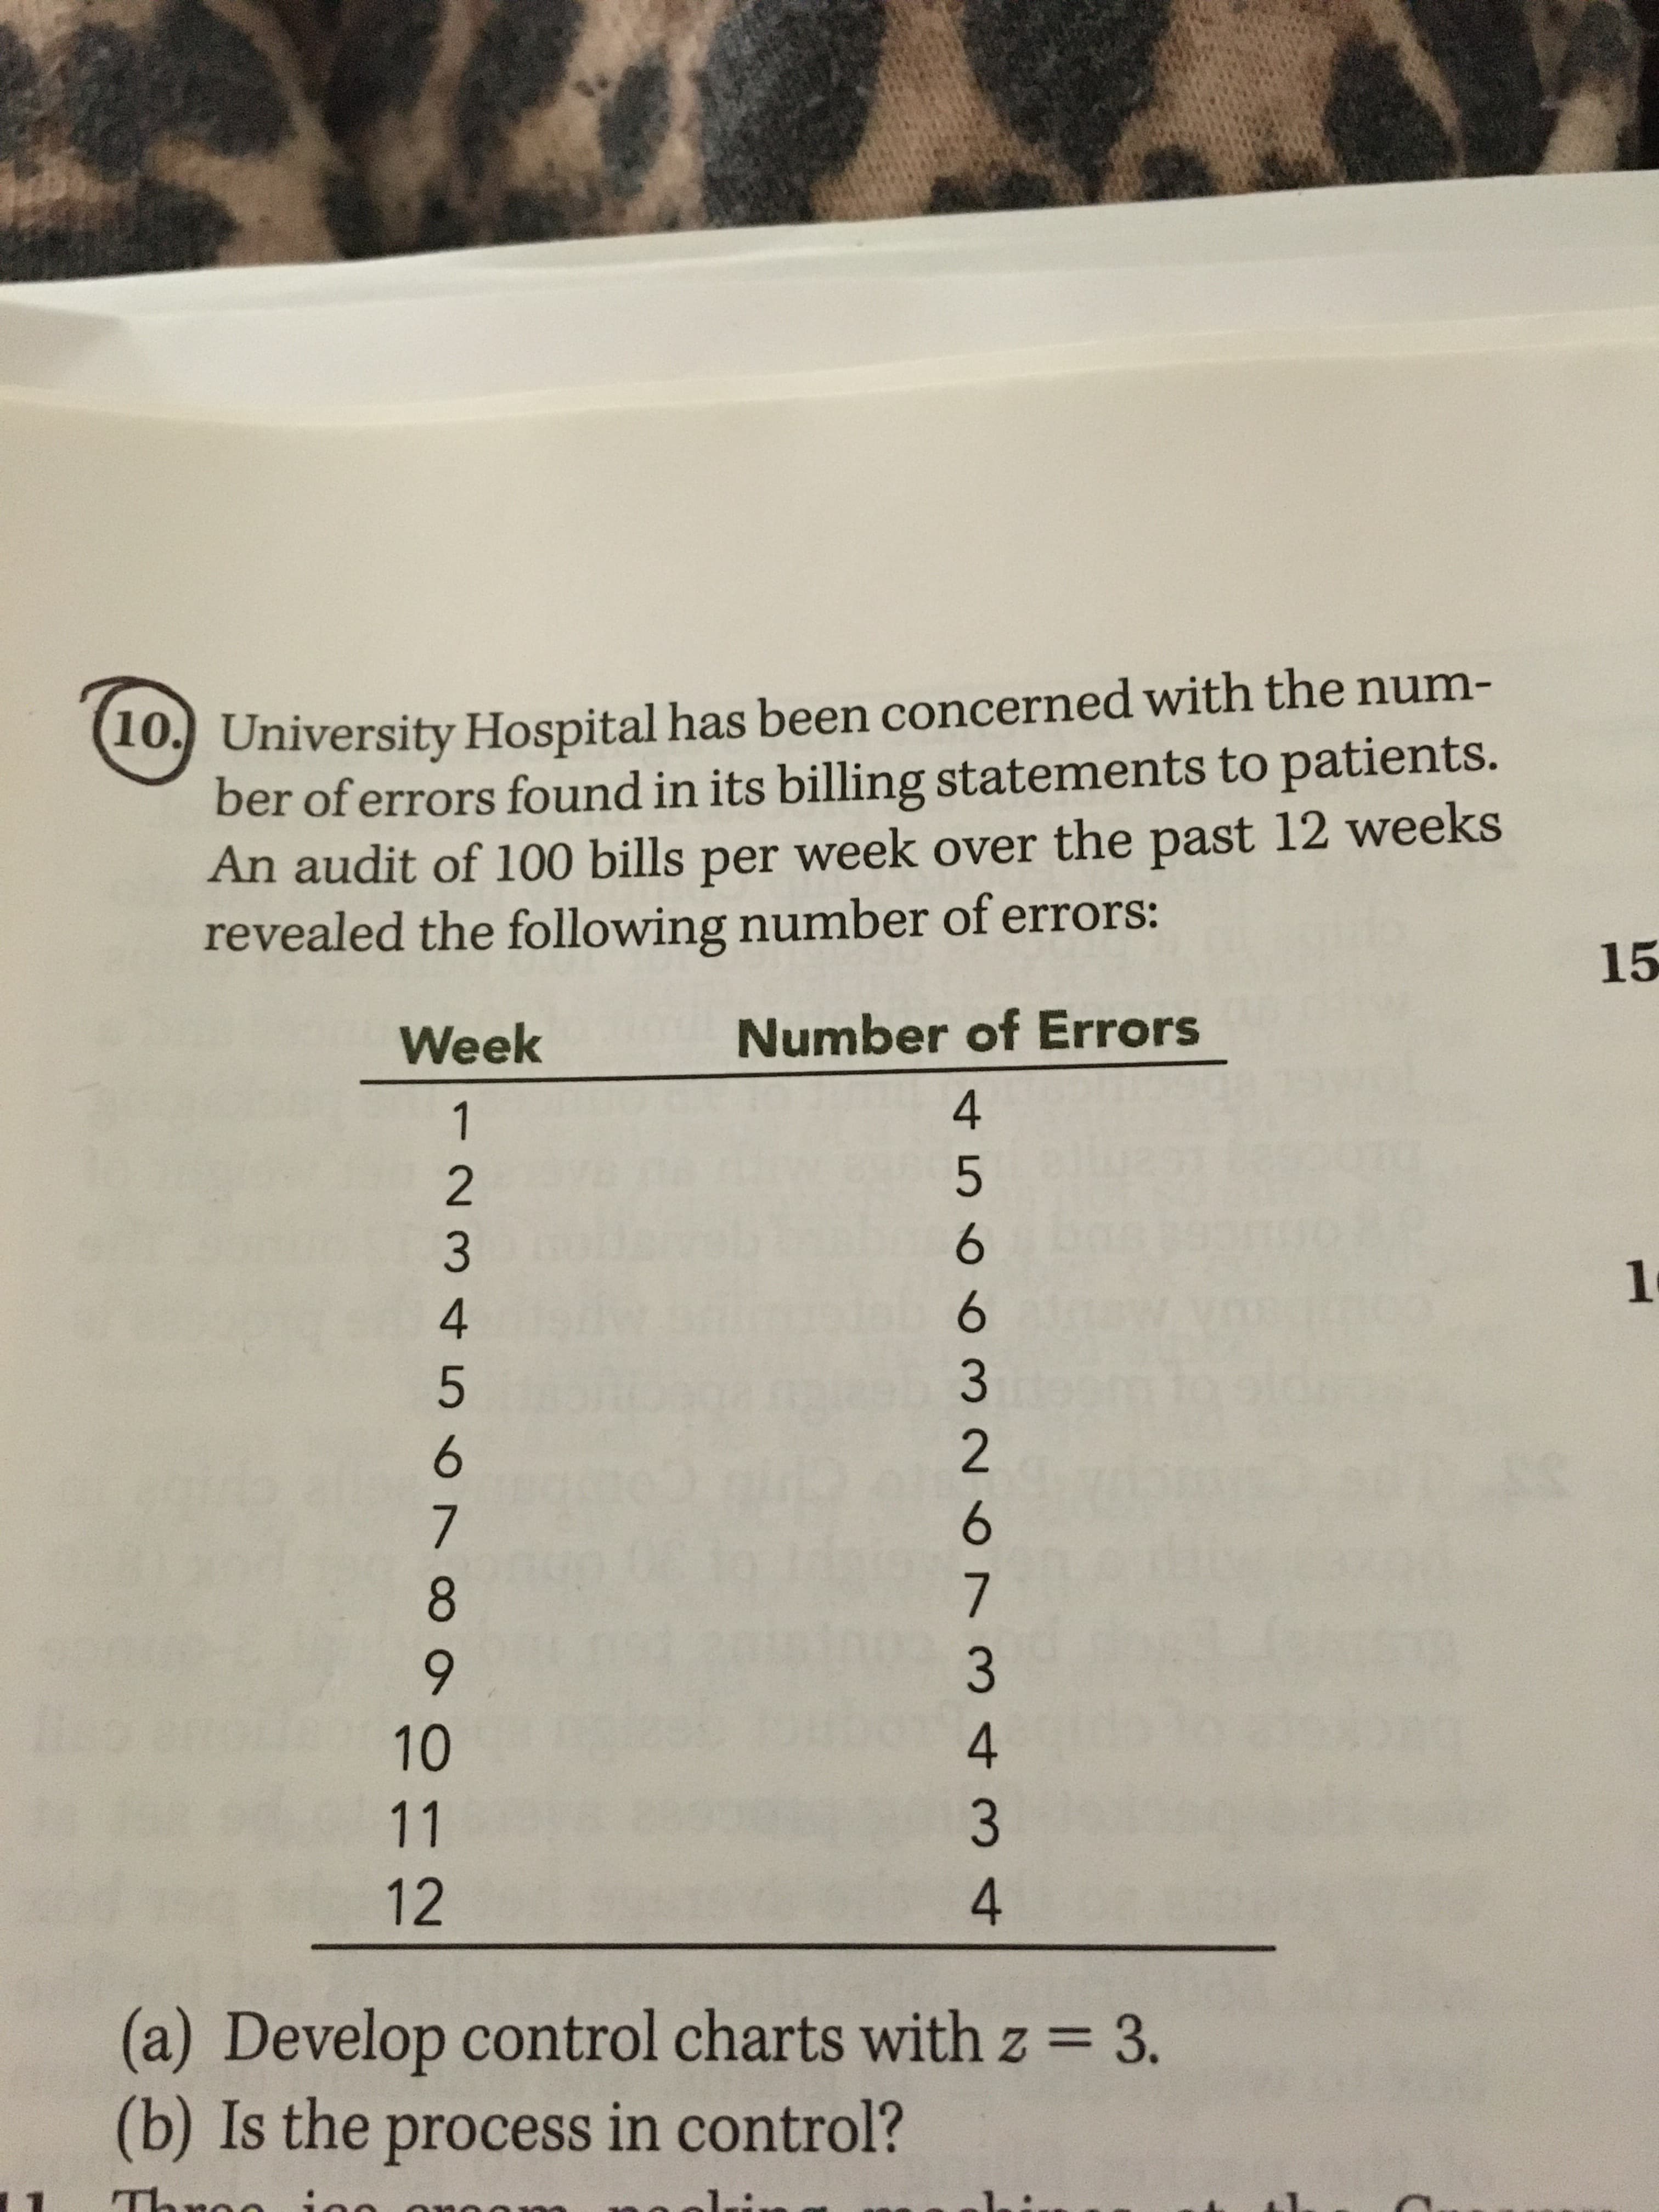 10) University Hospital has been concerned with the num-
ber of errors found in its billing statements to patients.
An audit of 100 bills per week over the past 12 weeks
revealed the following number of errors:
15
Week
Number of Errors
1.
8.
10
11
12
(a) Develop control charts with z = 3.
(b) Is the process in control?
1.
4 566 326 7342 4
1234 567∞
